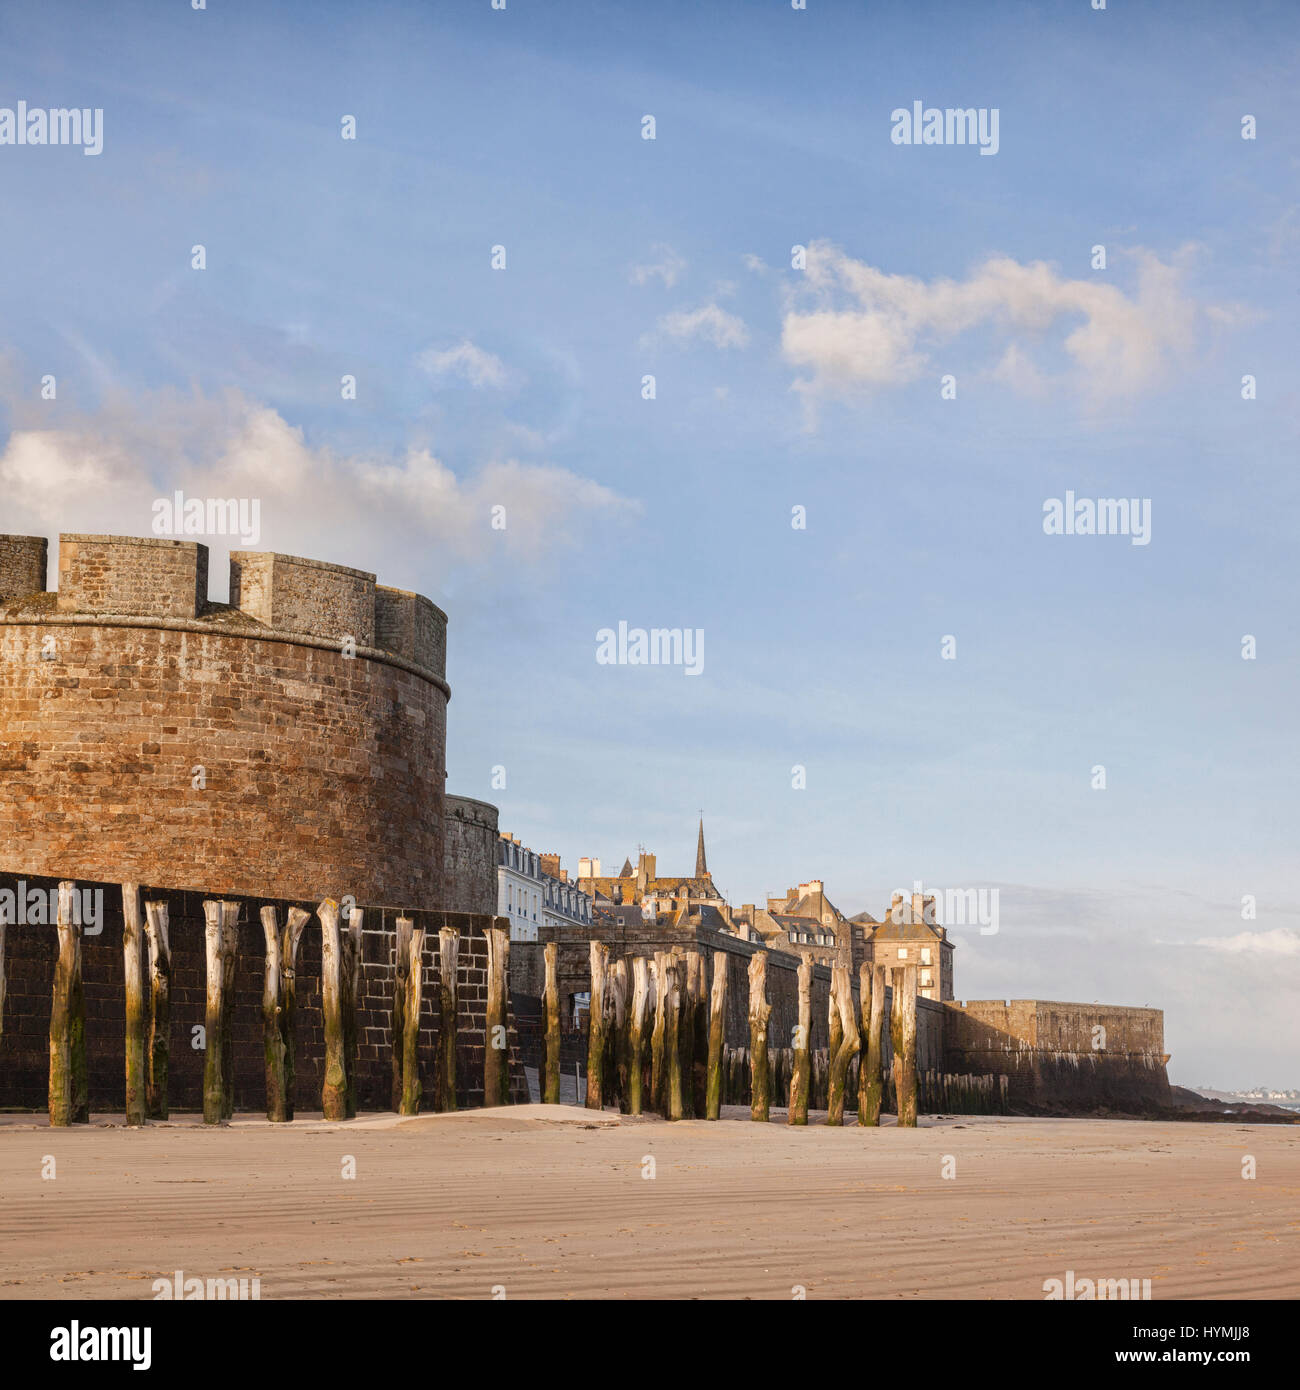 The ramparts and town of Saint Malo, Brittany, France, from the beach. Stock Photo